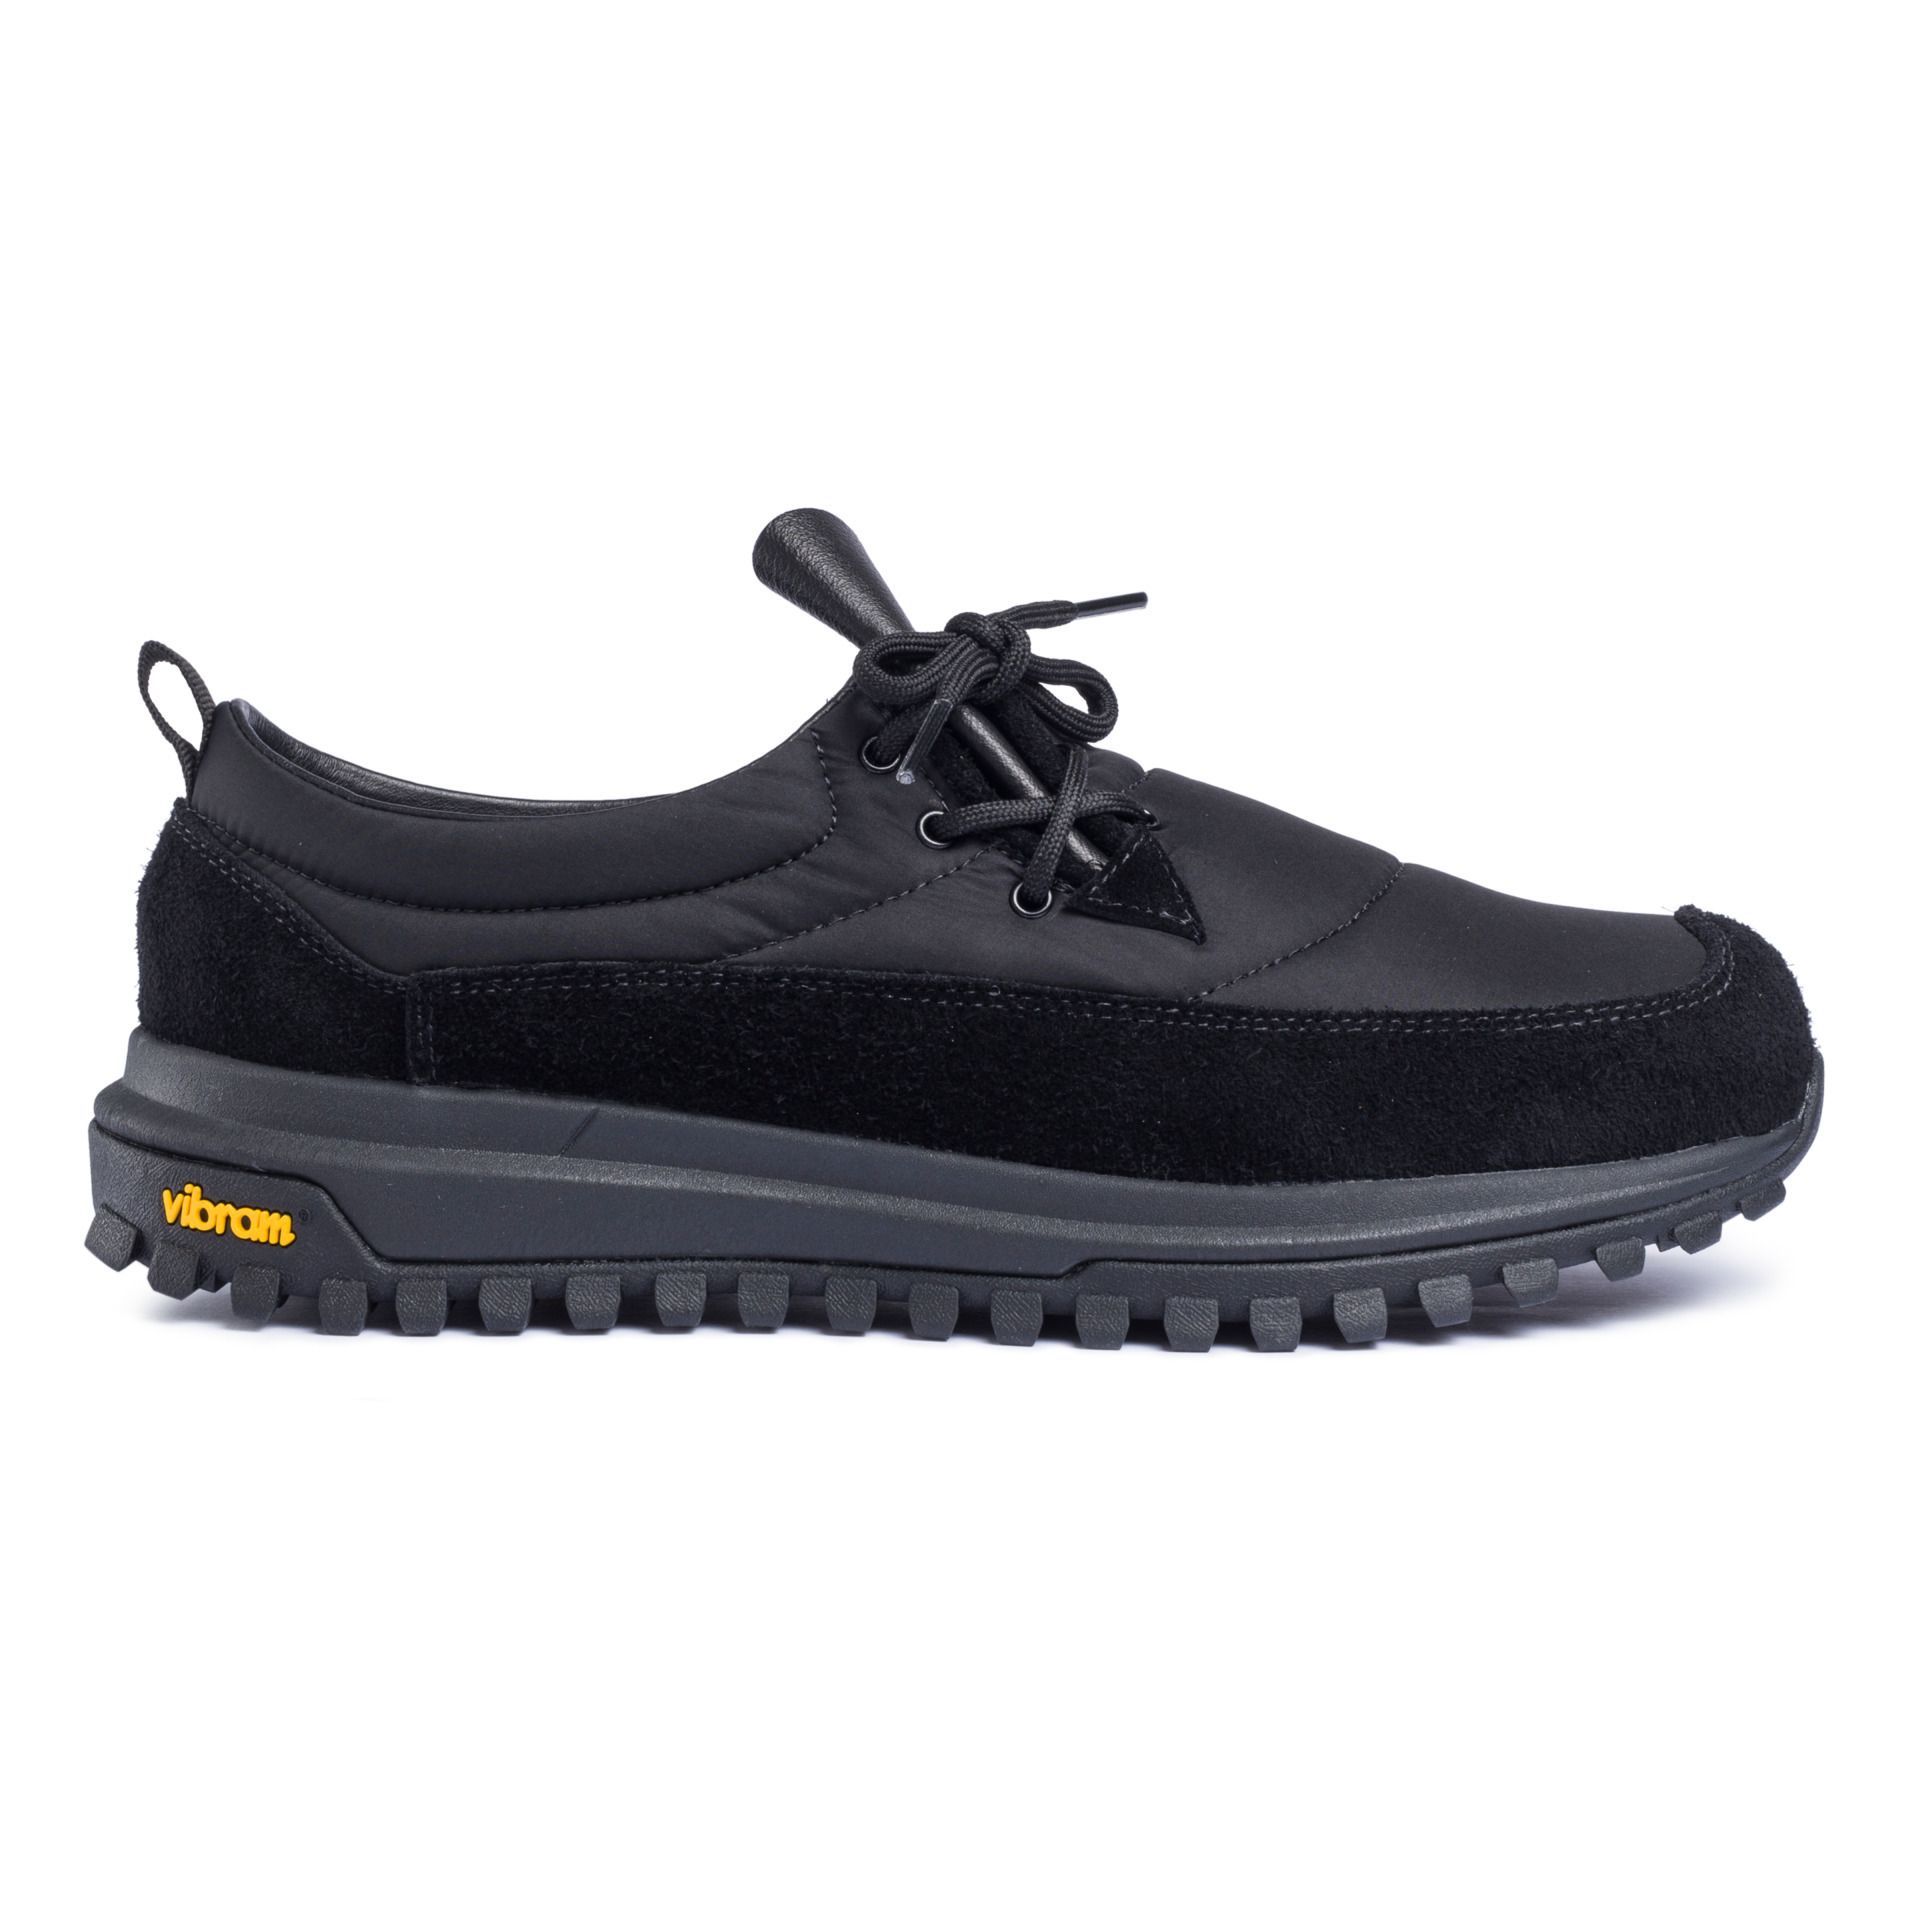 Diemme - Cavalese Padded trainers - Black | Smallable